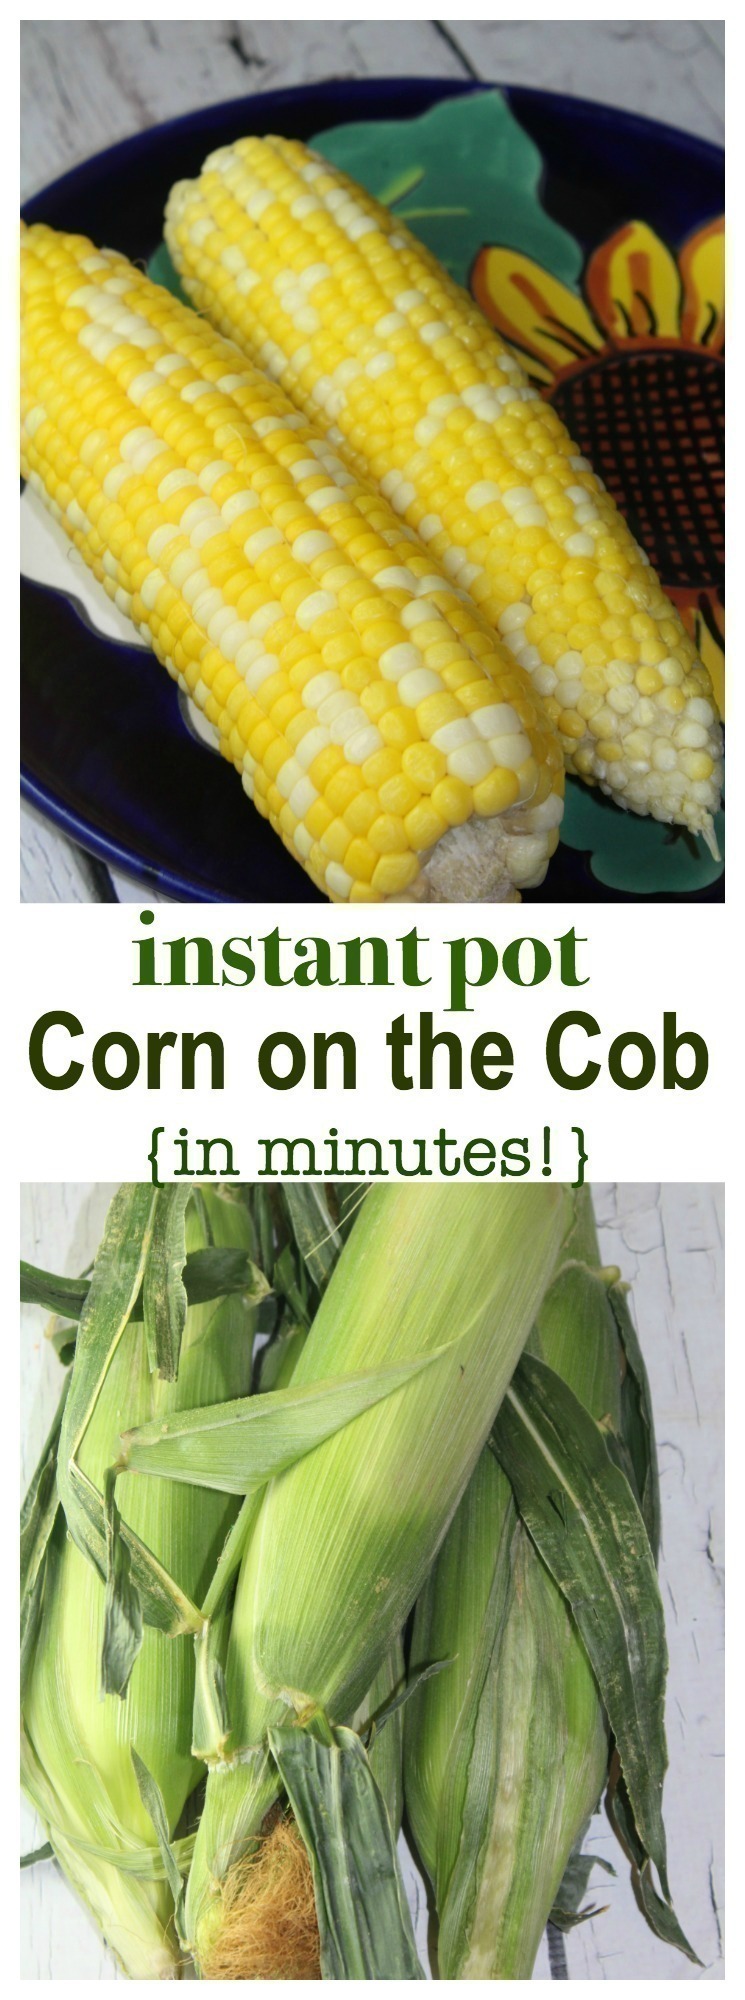 Easy Corn on the Cob in the Instant Pot (Takes MINUTES to make!)